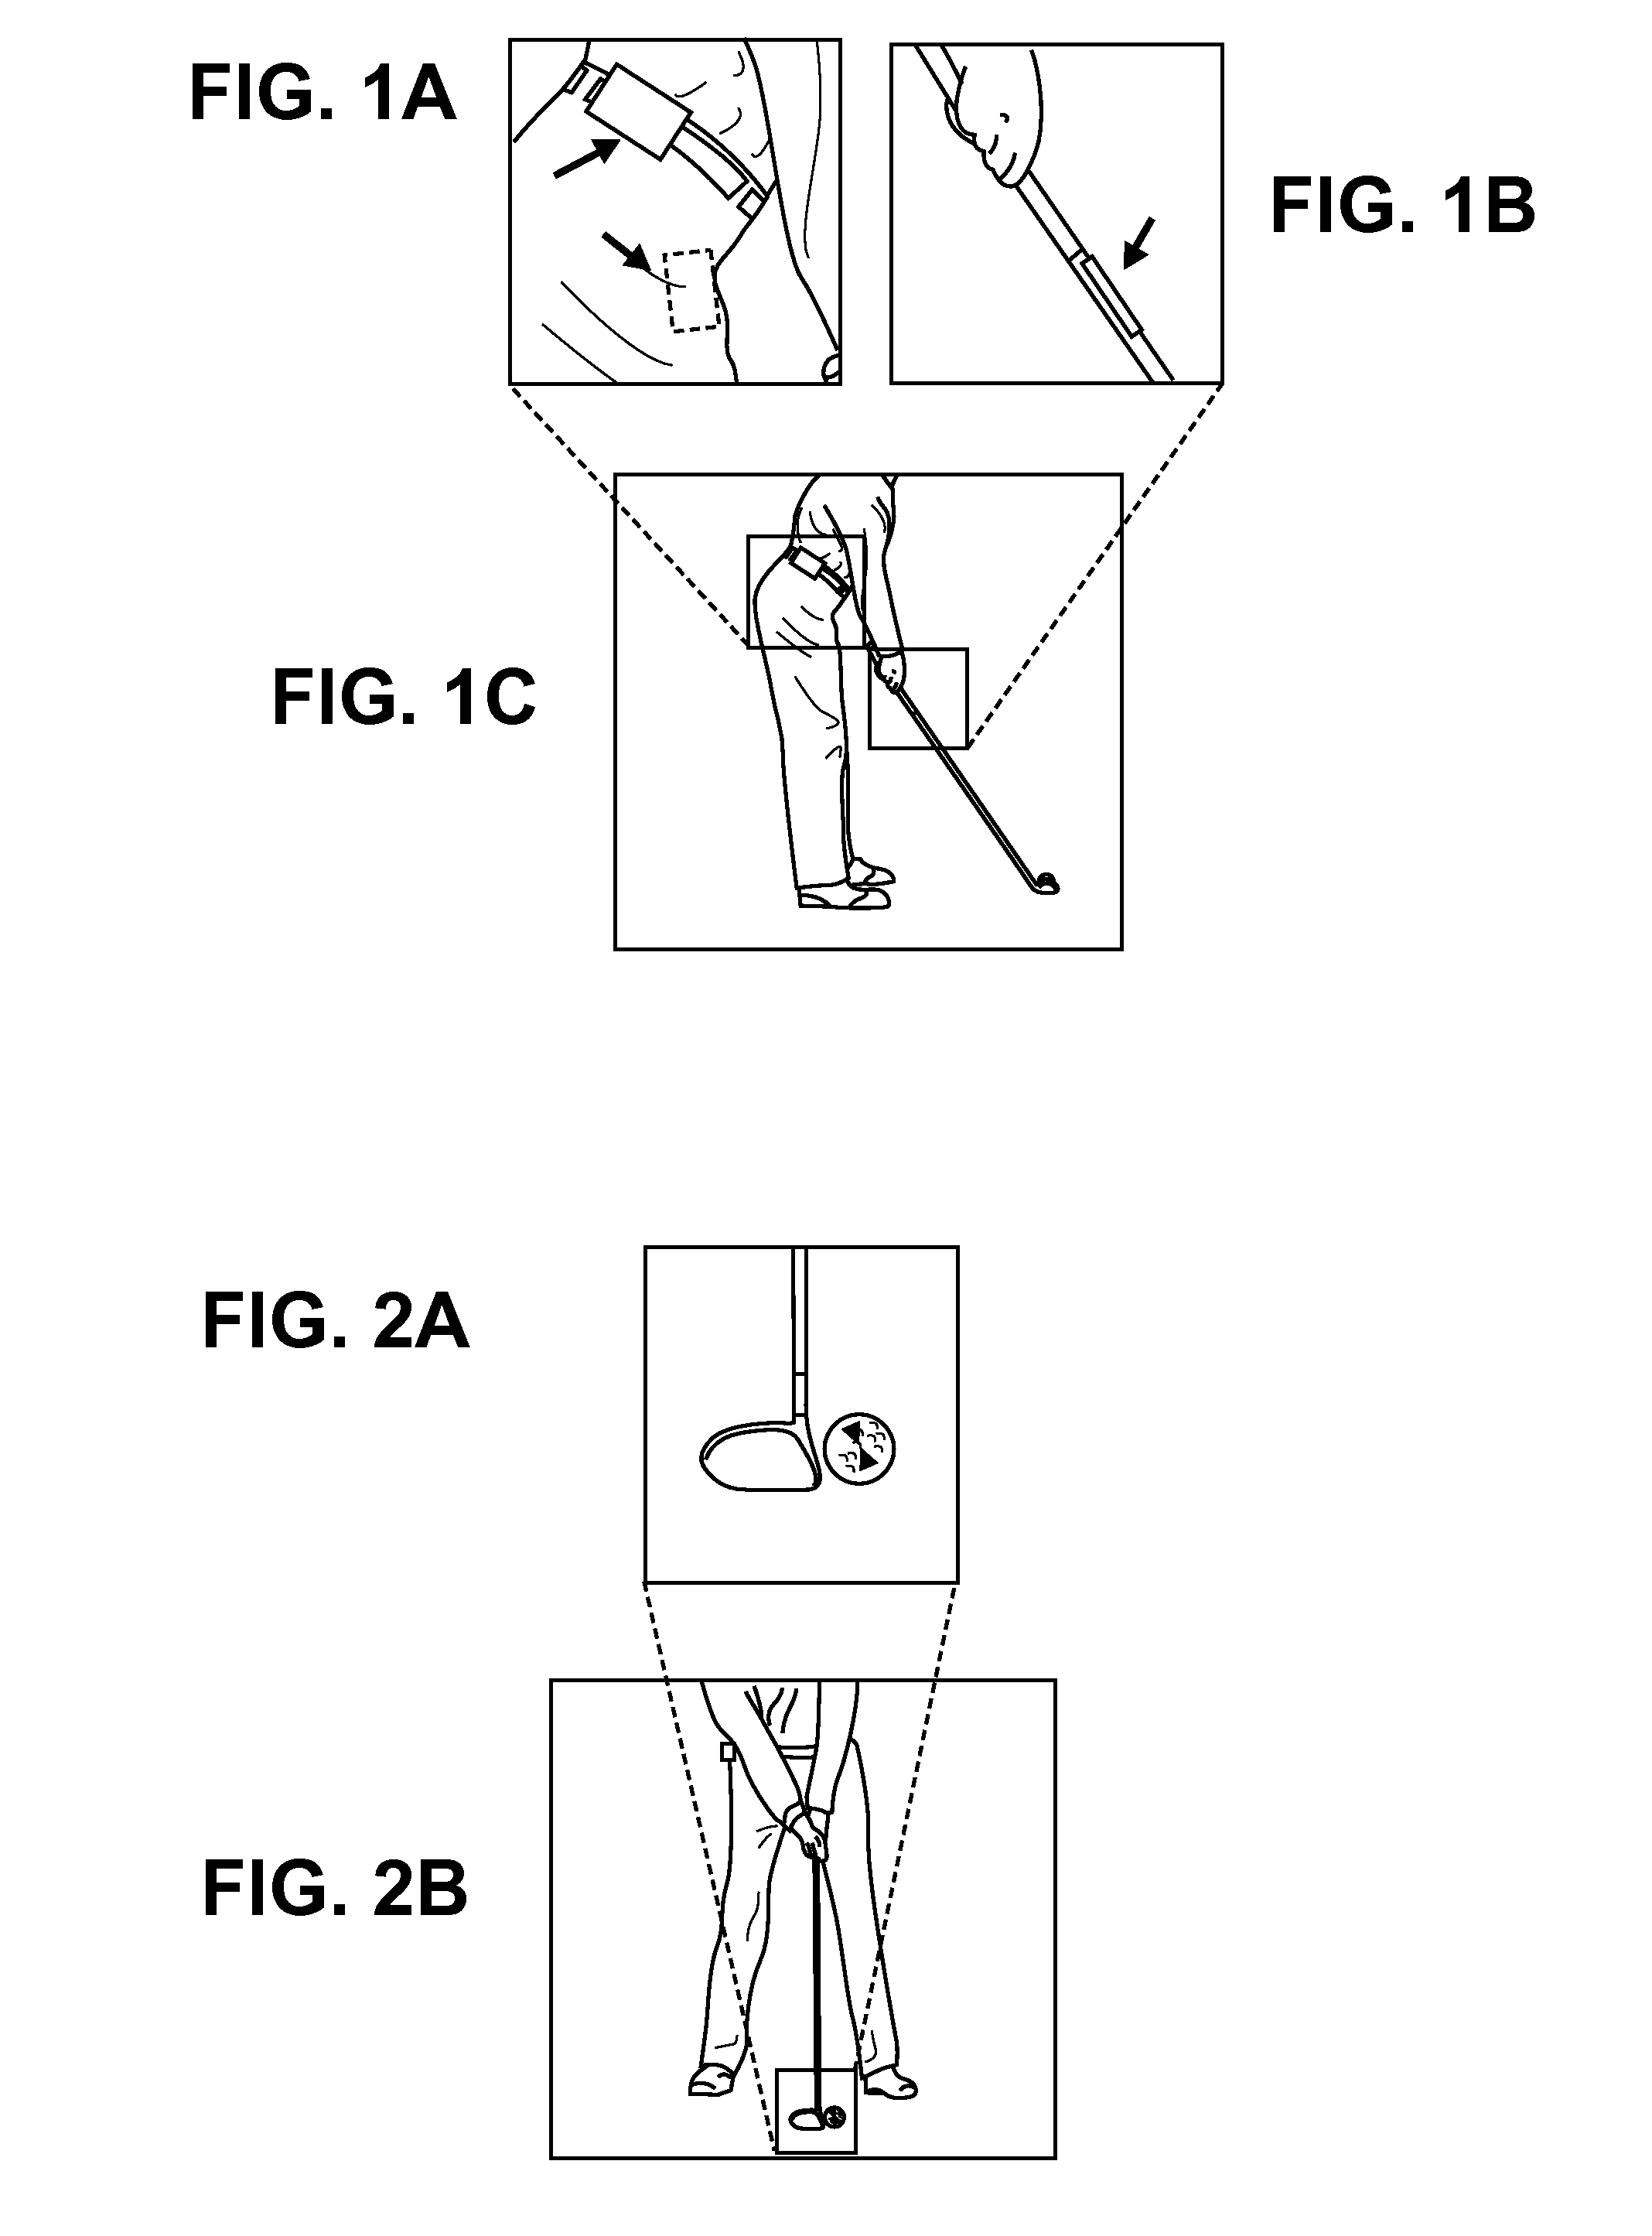 Apparatuses, methods and systems relating to automatic golf data collecting and recording